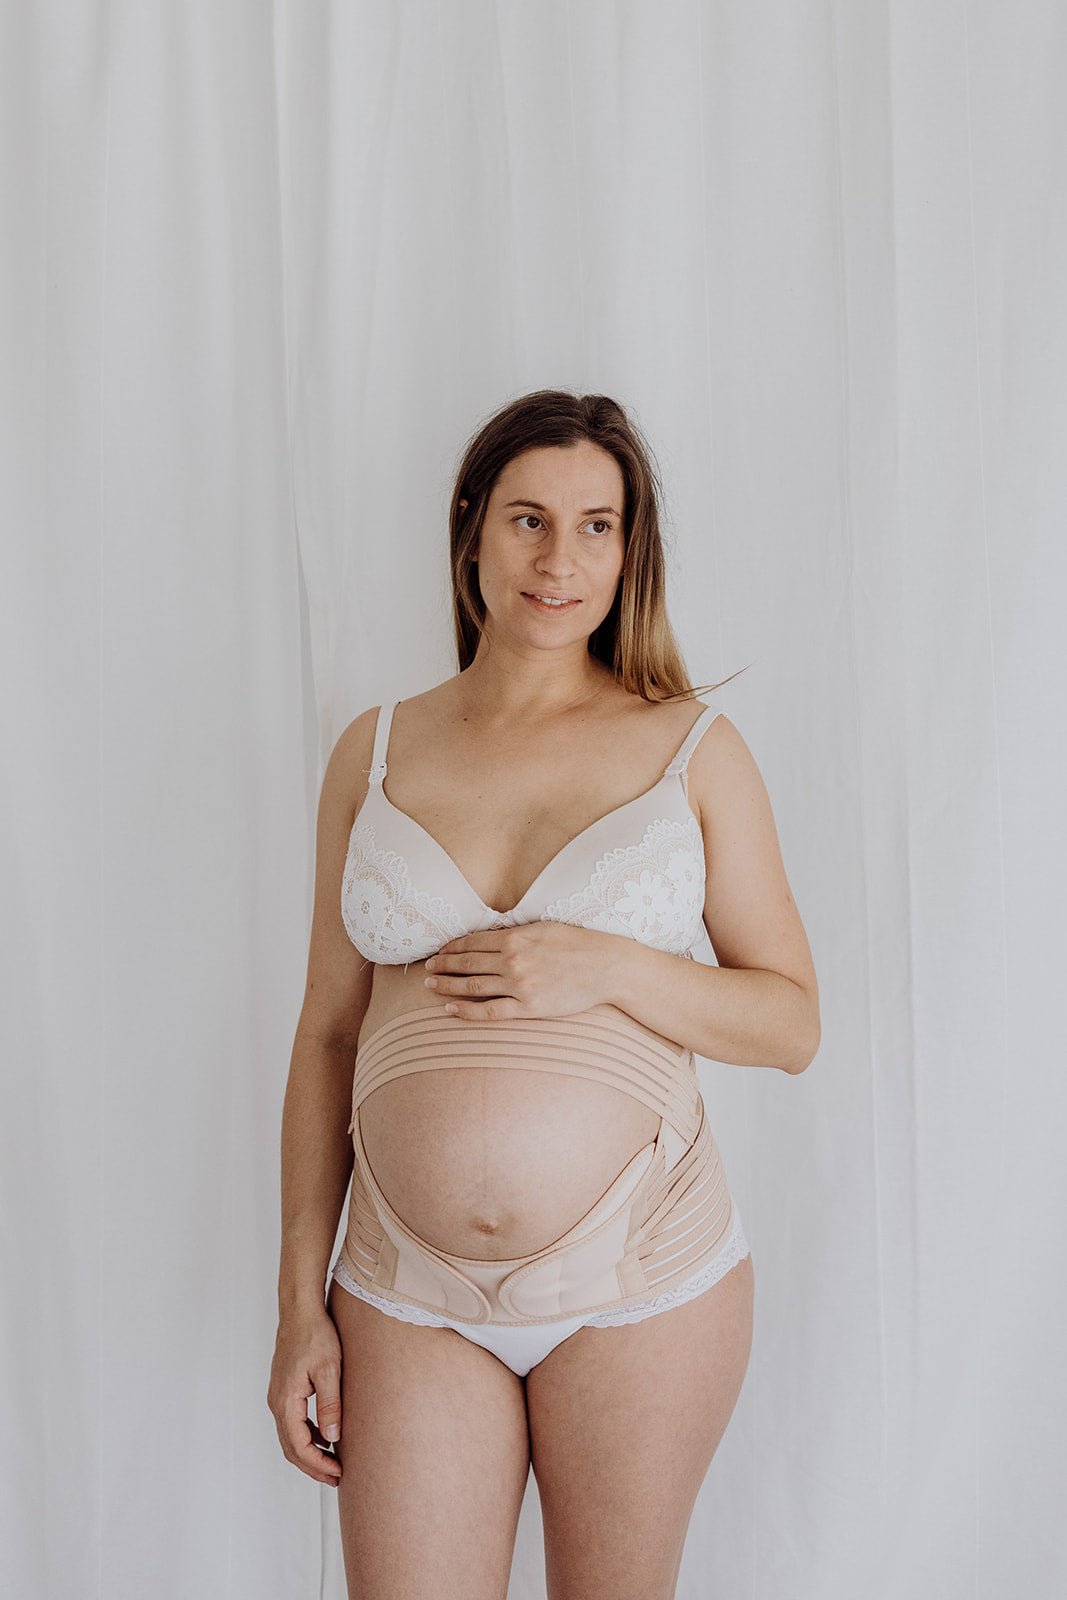 Lingerie That Hides Your Post Baby Belly